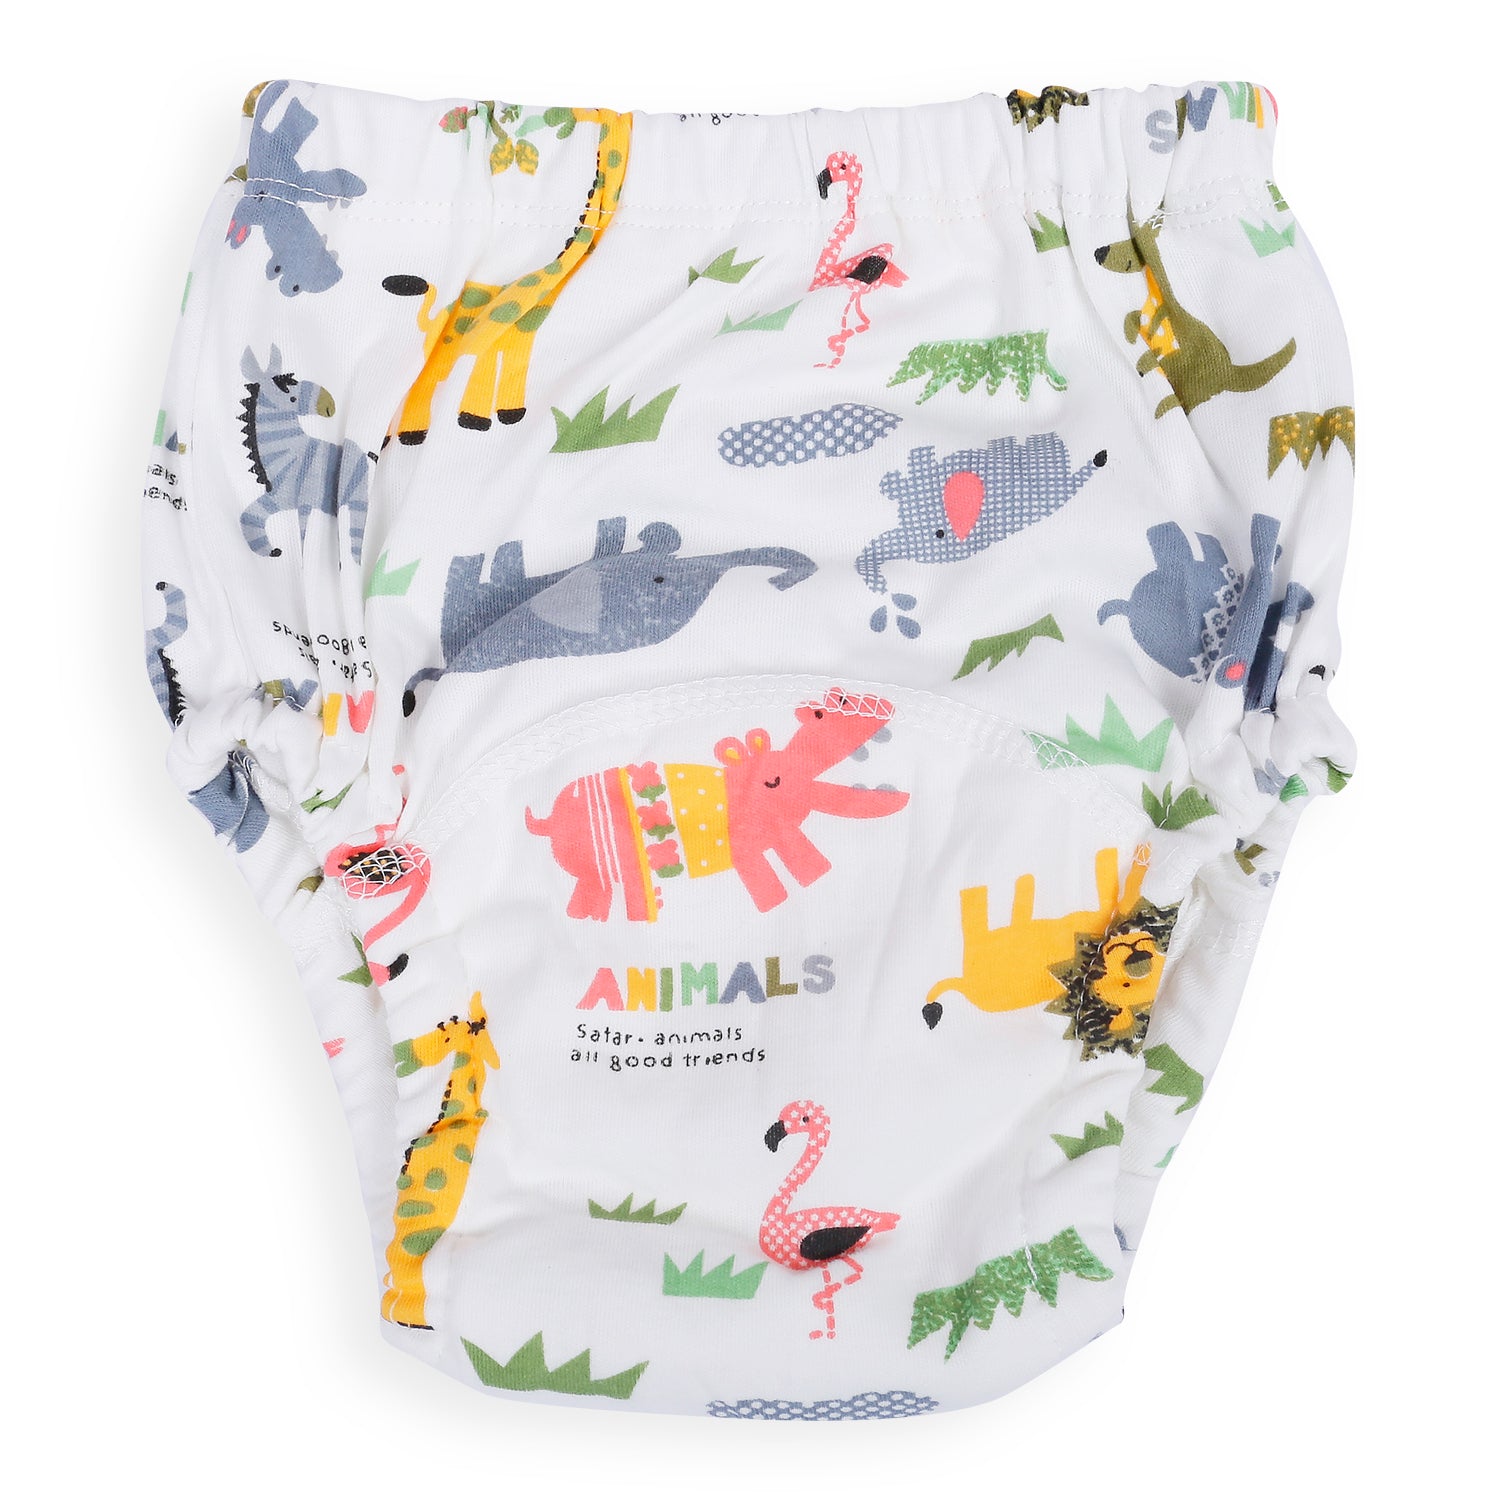 I Love Animals Reusable Cloth Training Pants Clothing Accessory Diaper Panty - Multicolour